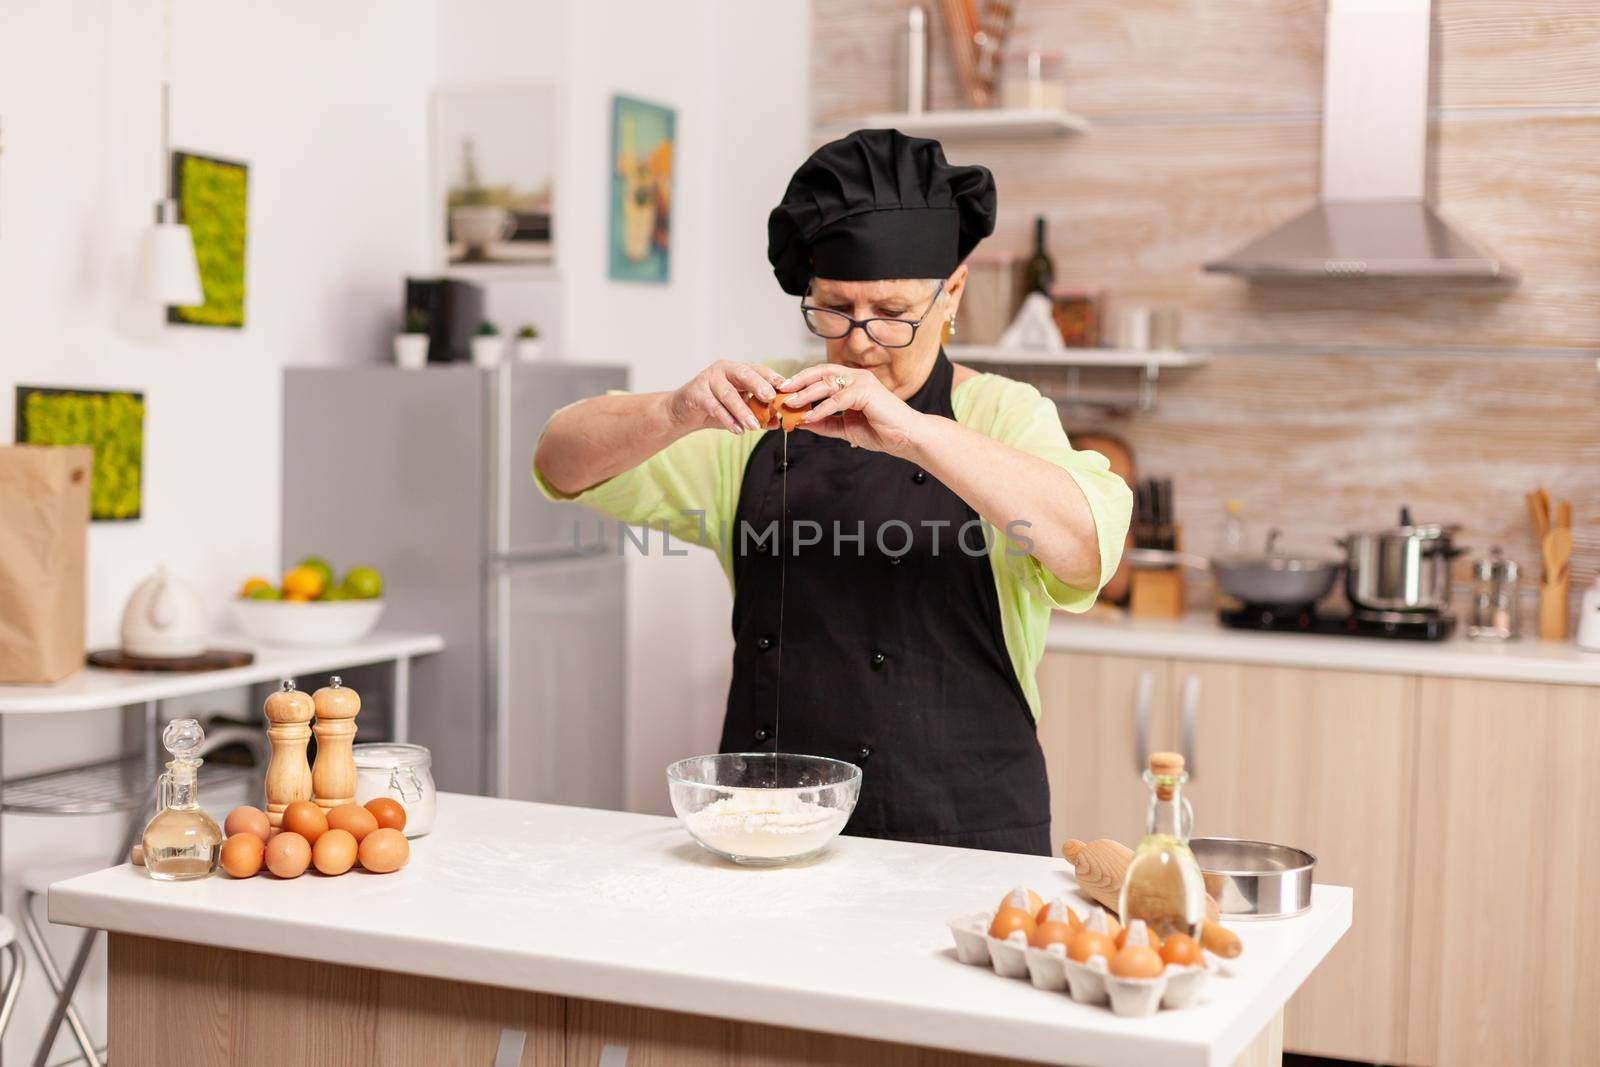 A woman prepares a dough for baking cracking eggs in home kitchen. Elderly pastry chef cracking egg on glass bowl for cake recipe in kitchen, mixing by hand, kneading ingredients prreparing homemade cake